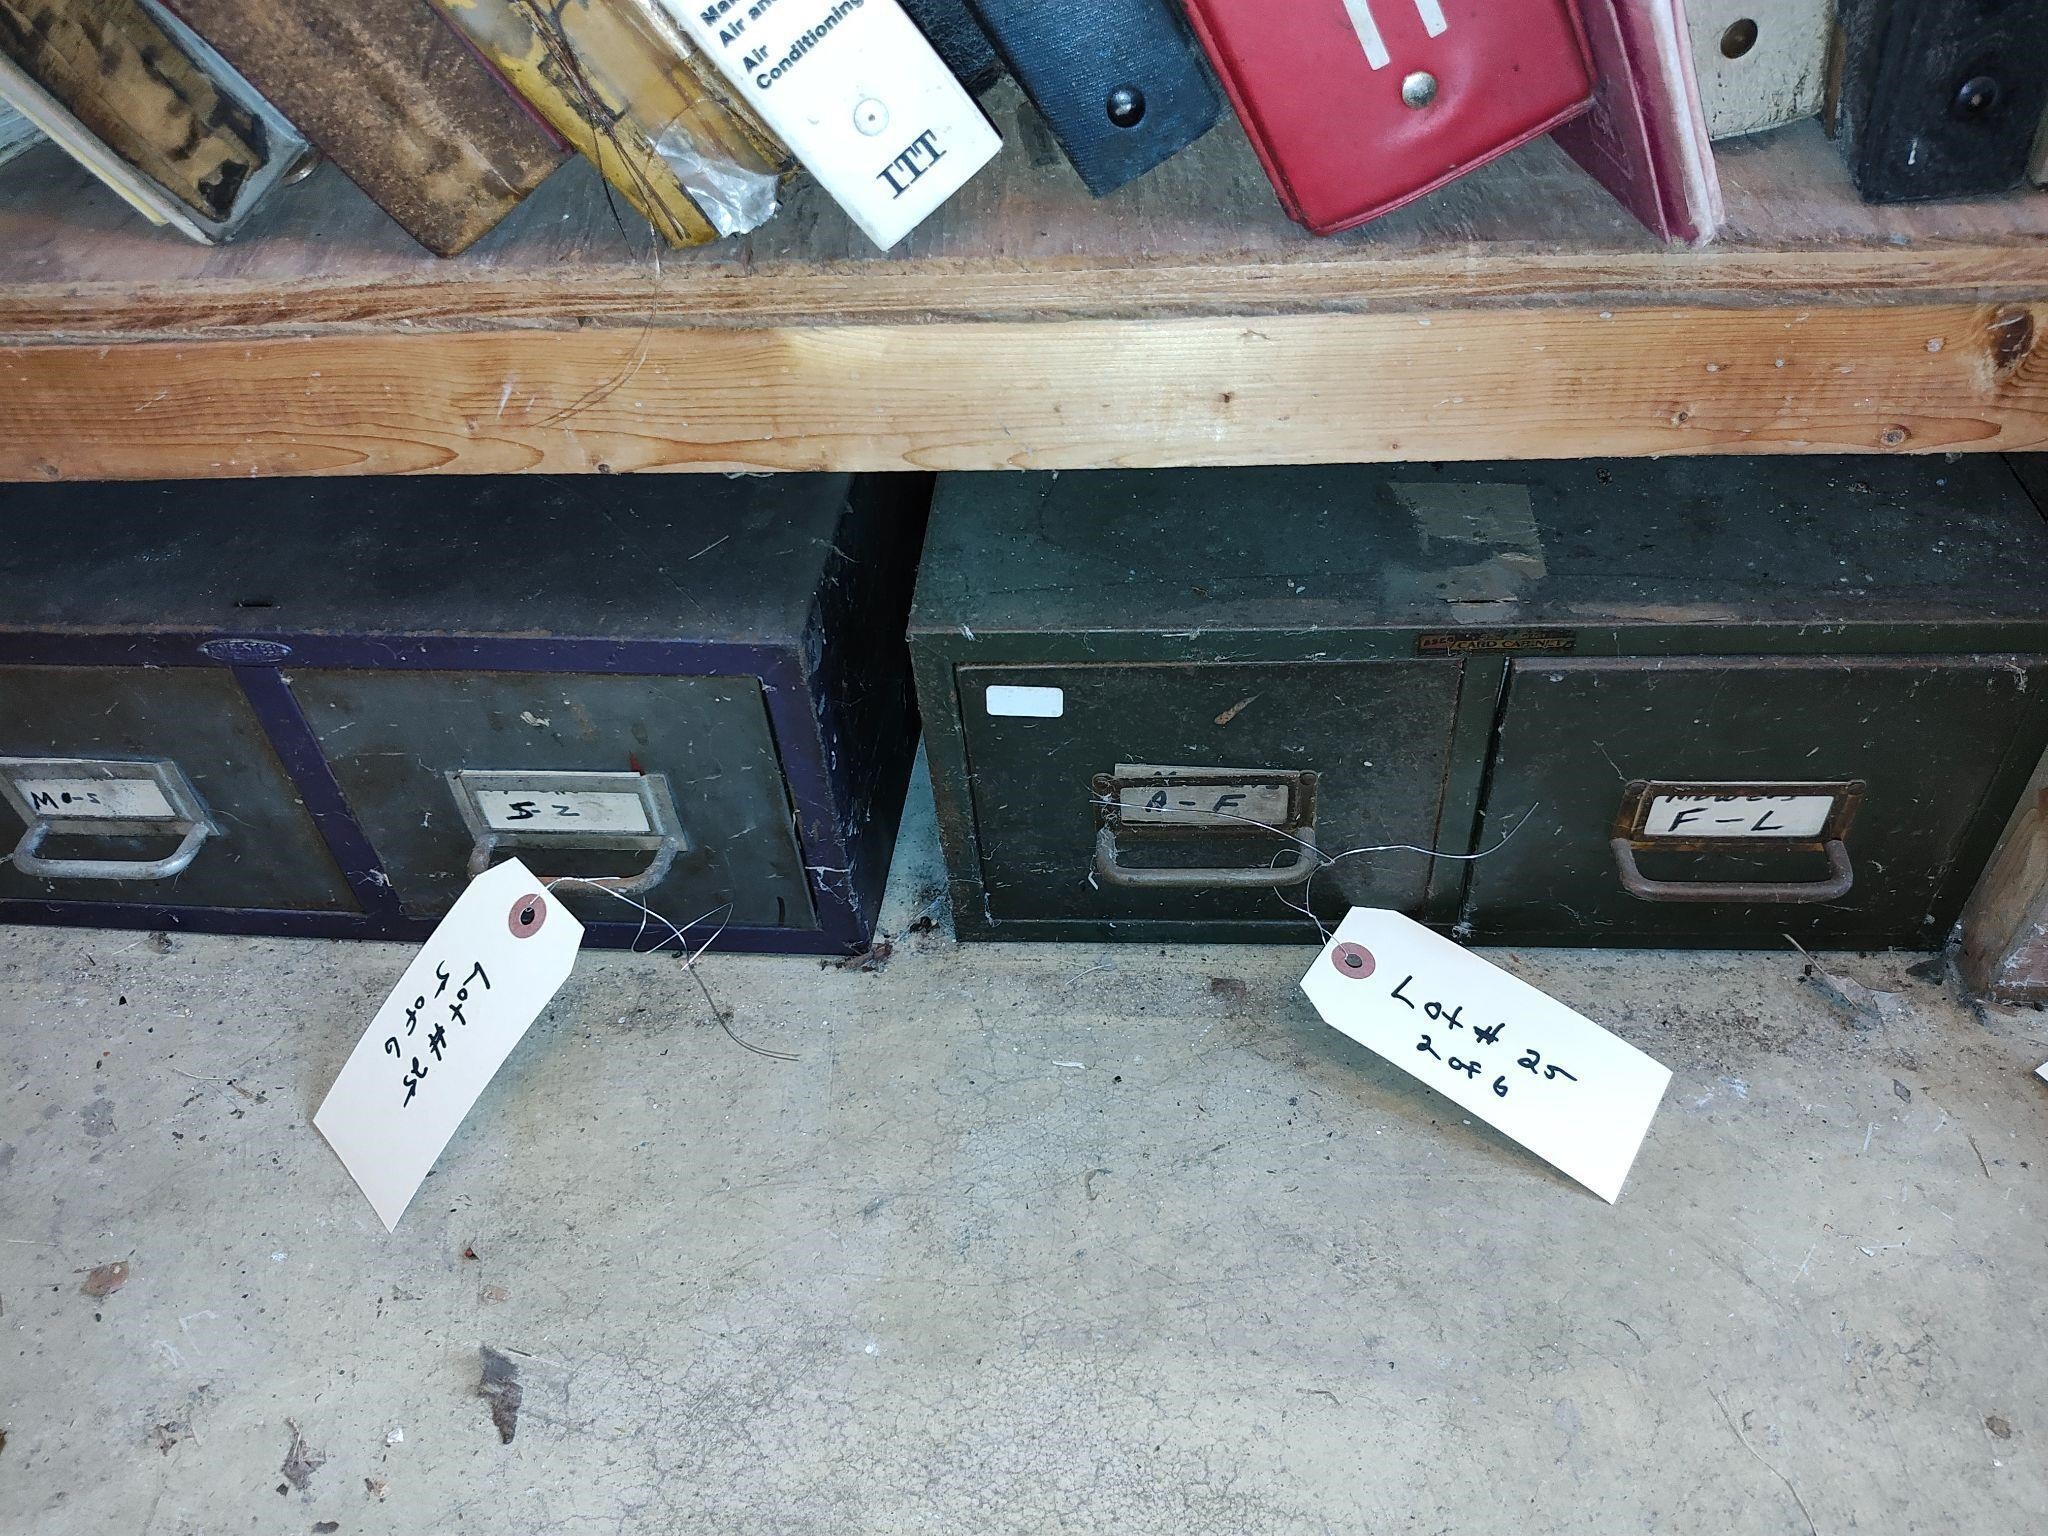 Old electric heater with filing cabinets.